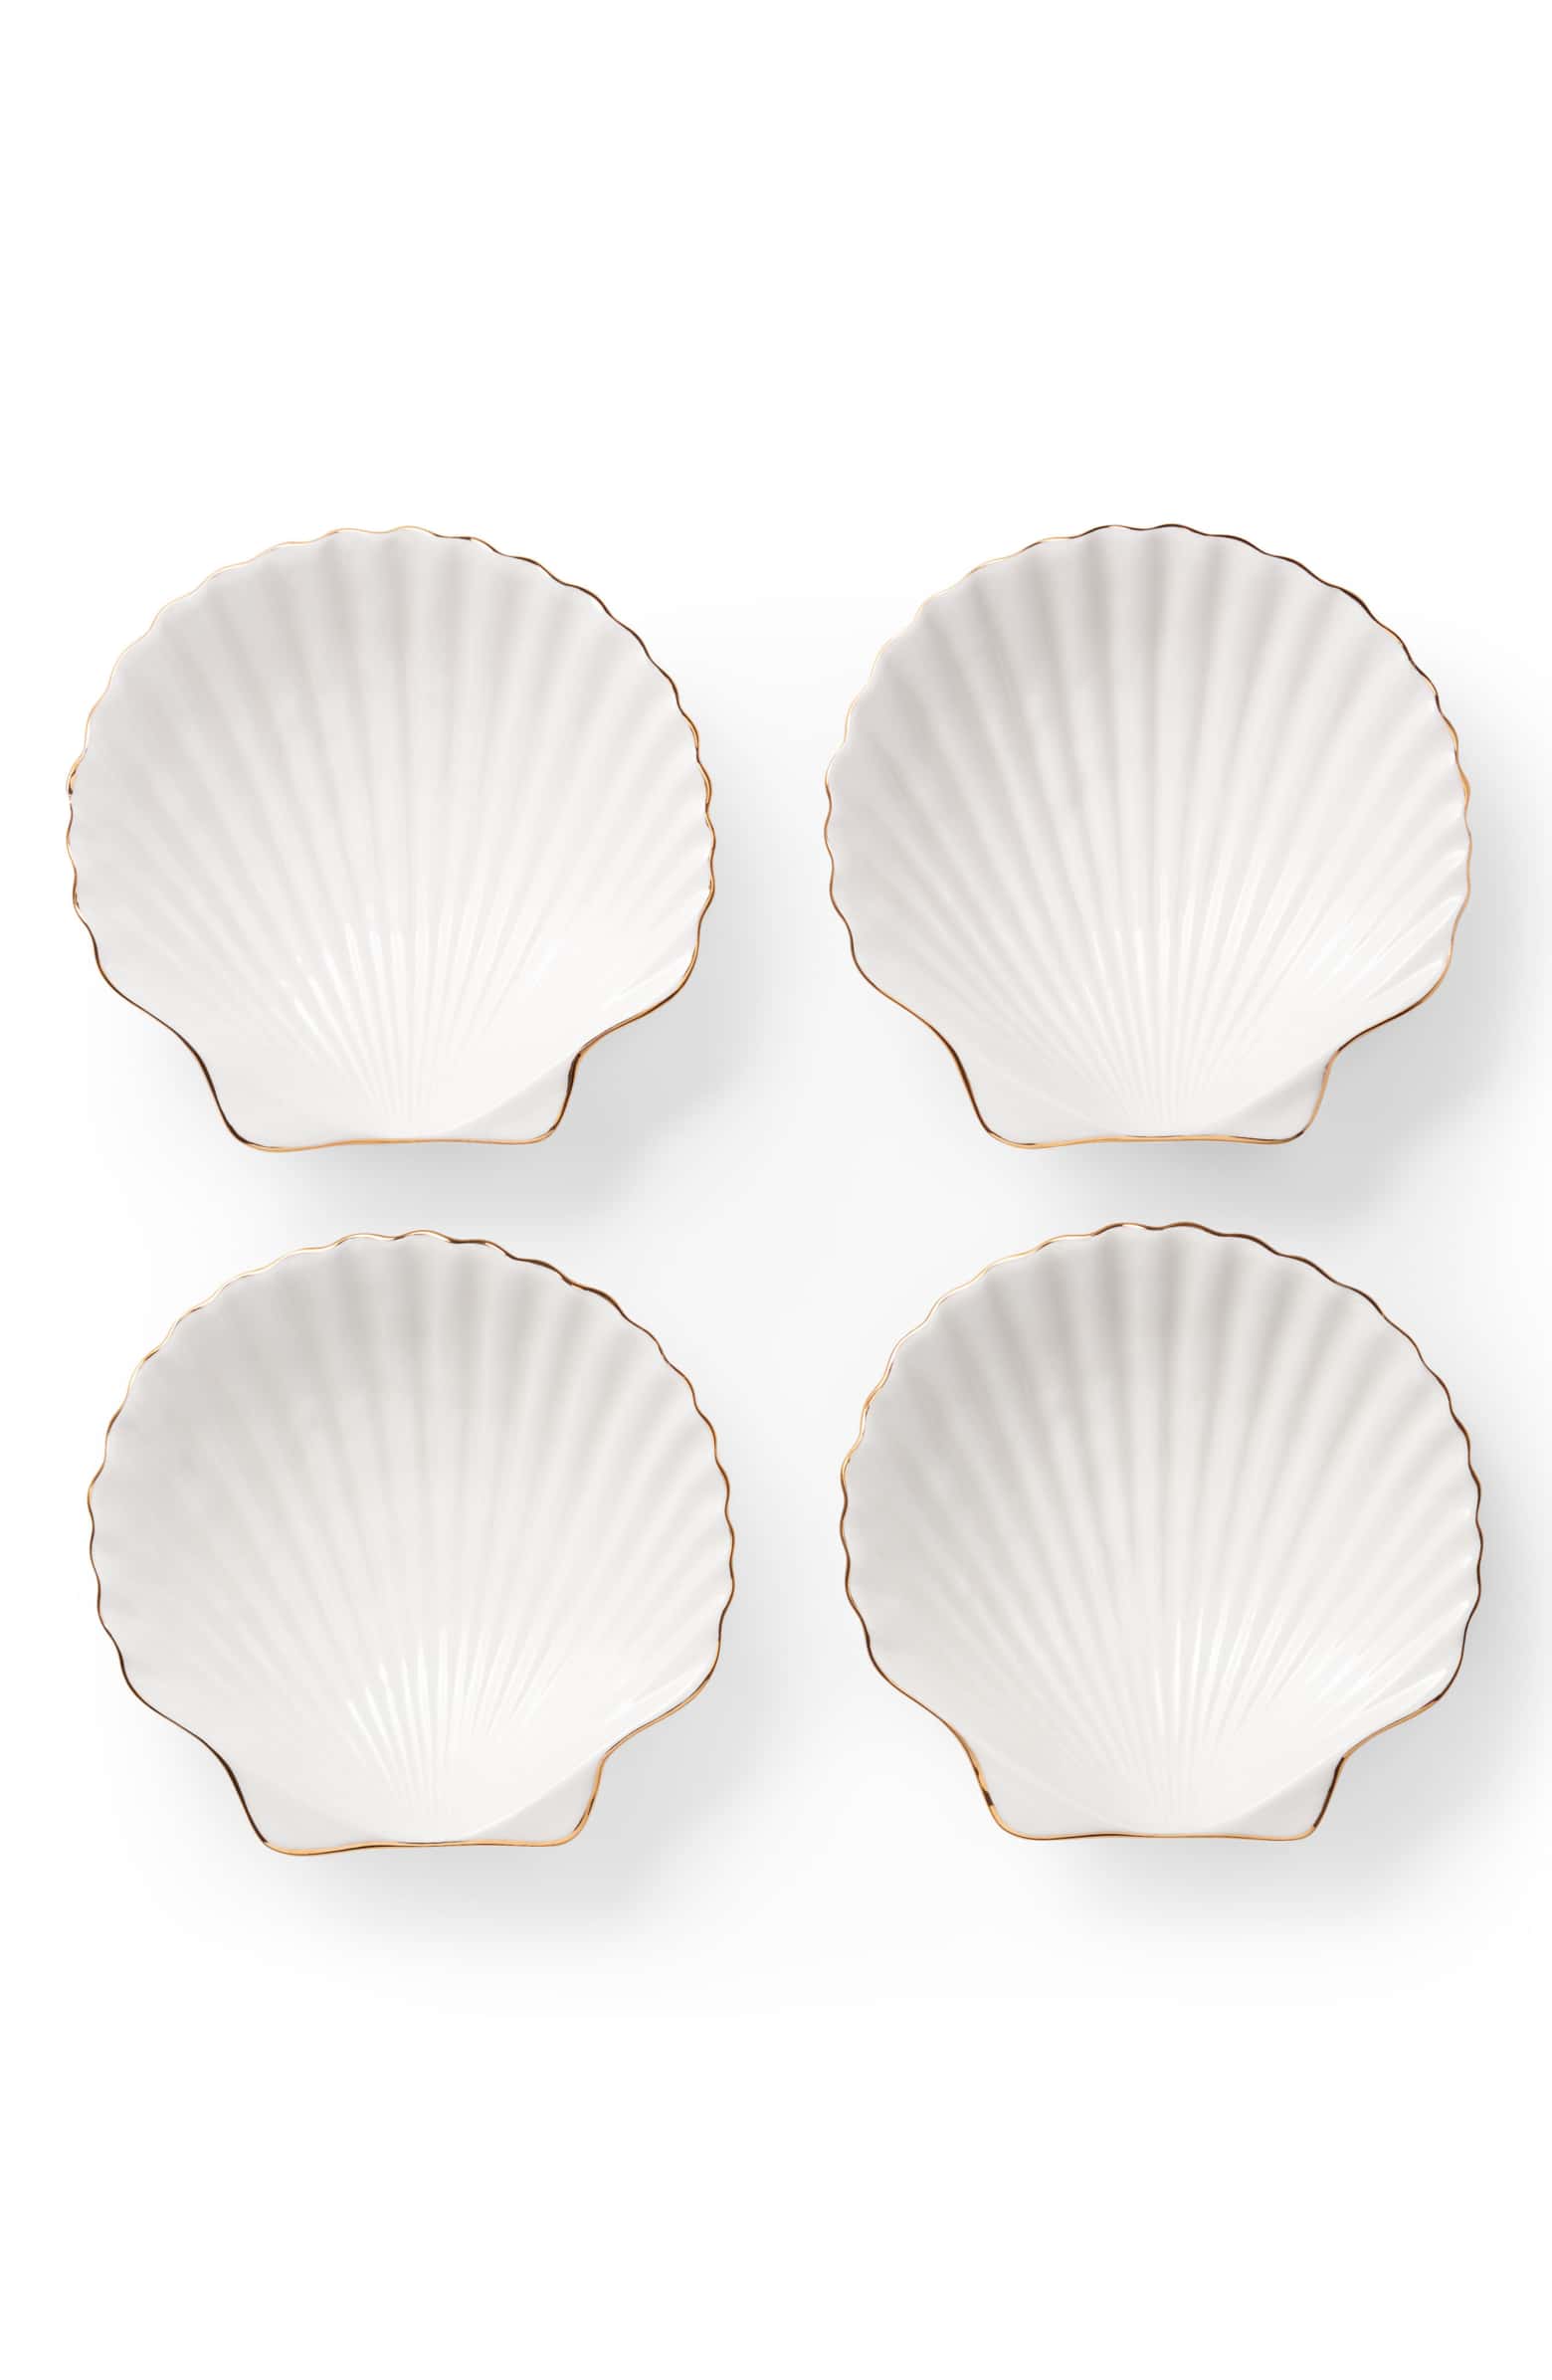 Shell Appetizer Plates